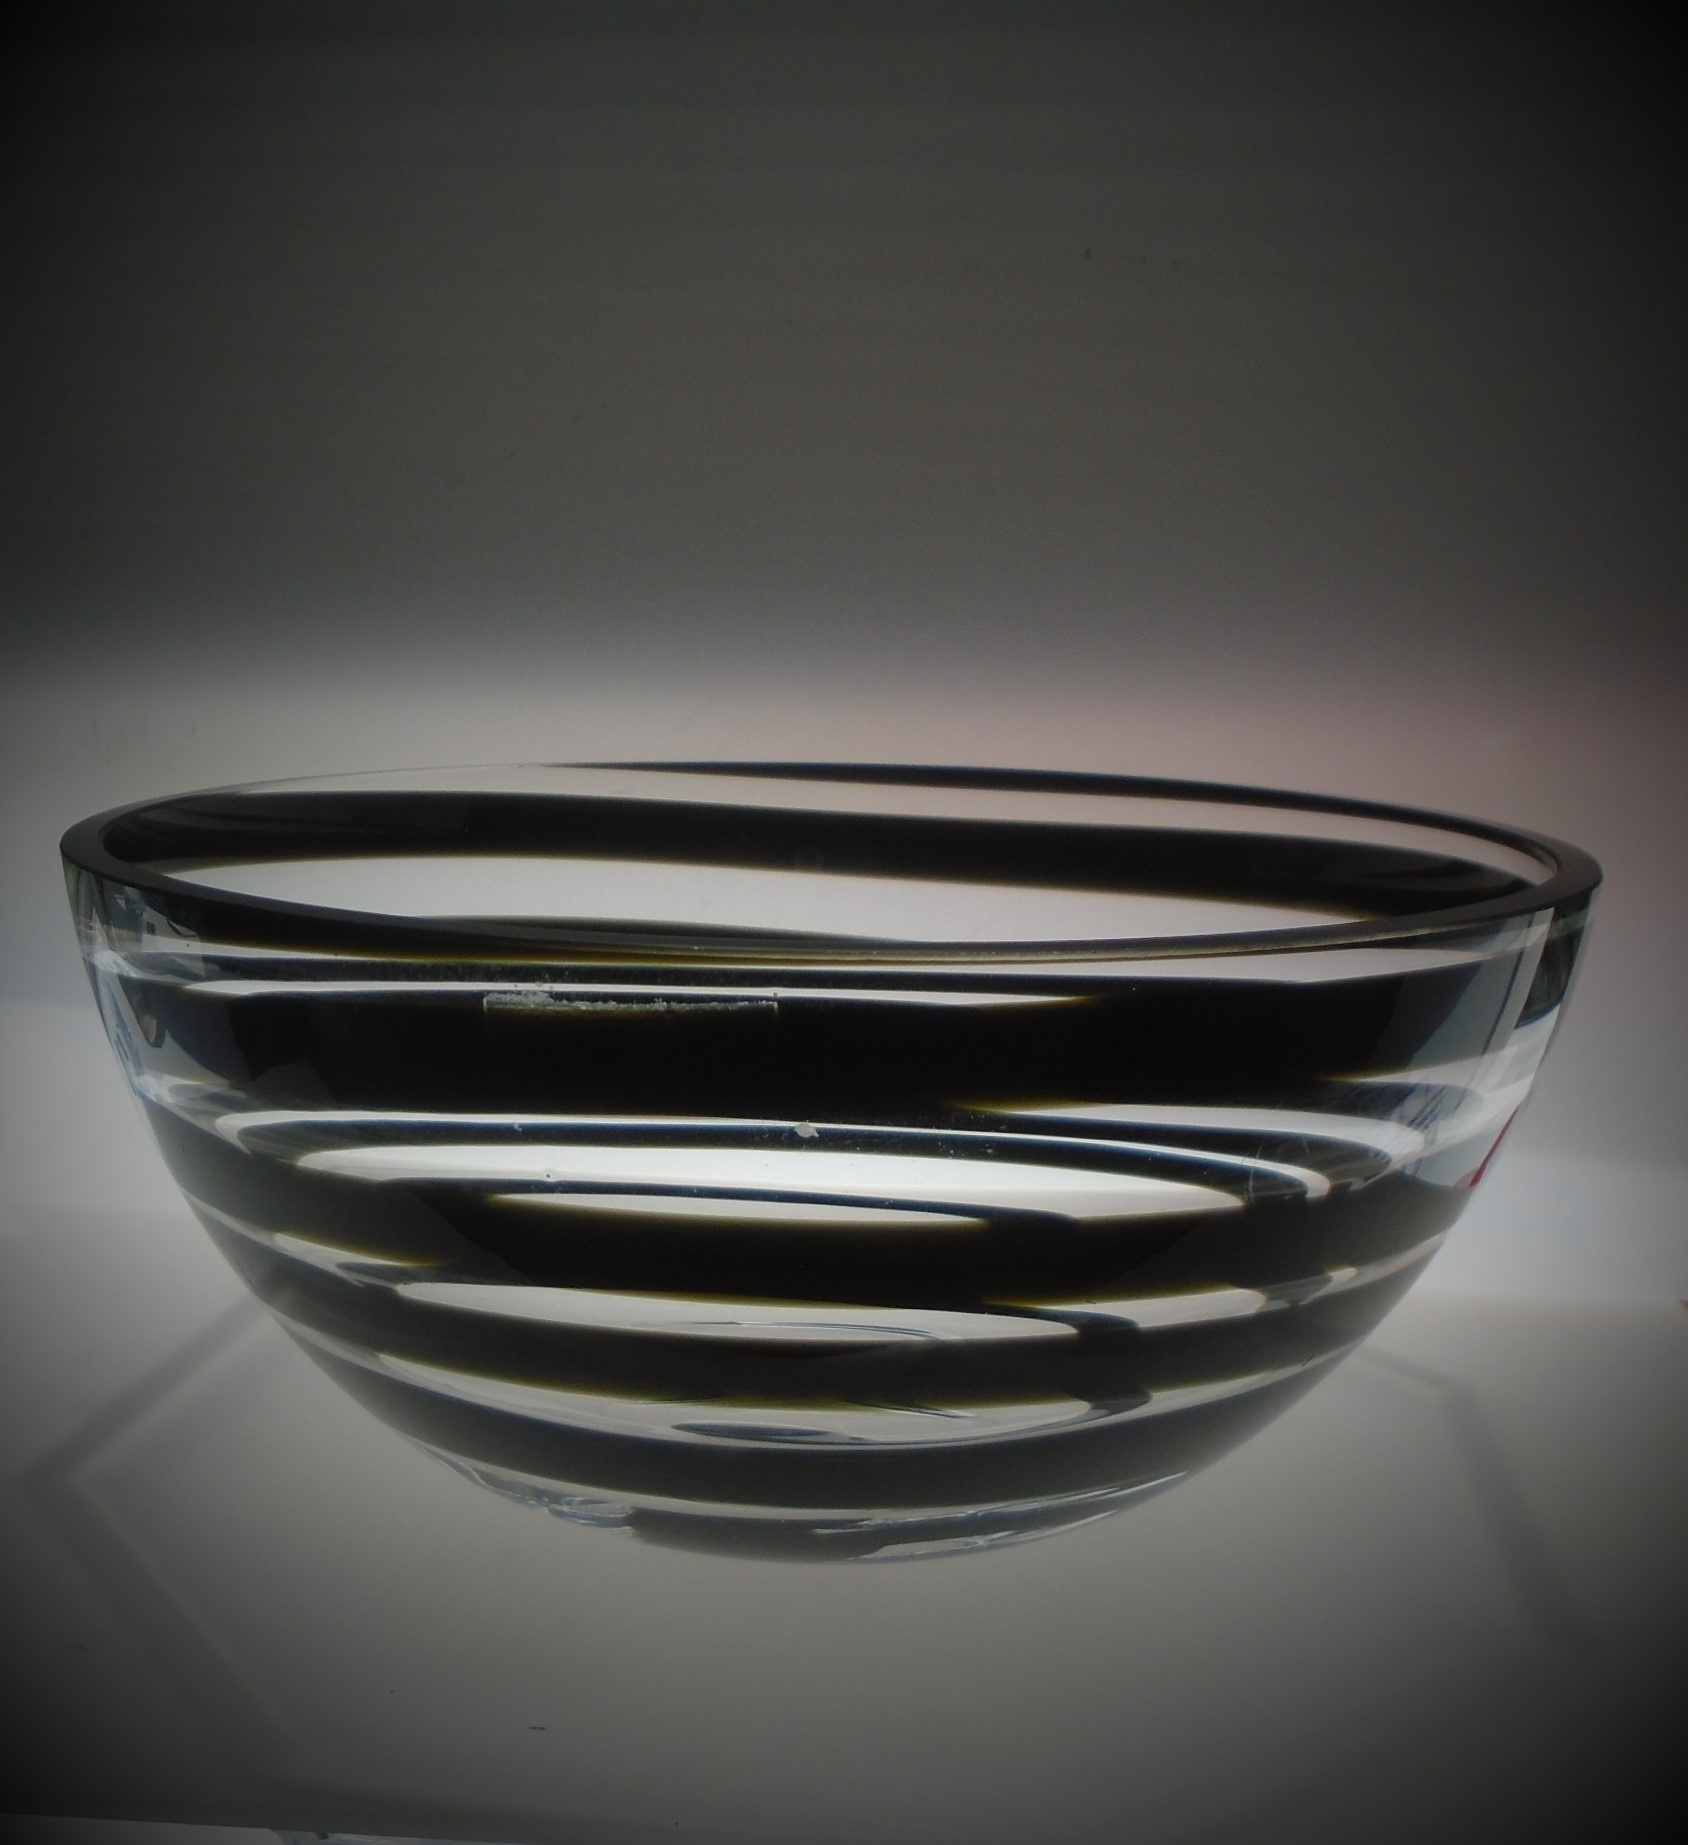 Offered for sale is a lovely piece of KROSNO CRYSTAL IN THE FORM OF THIS LARGE GLASS BOWL